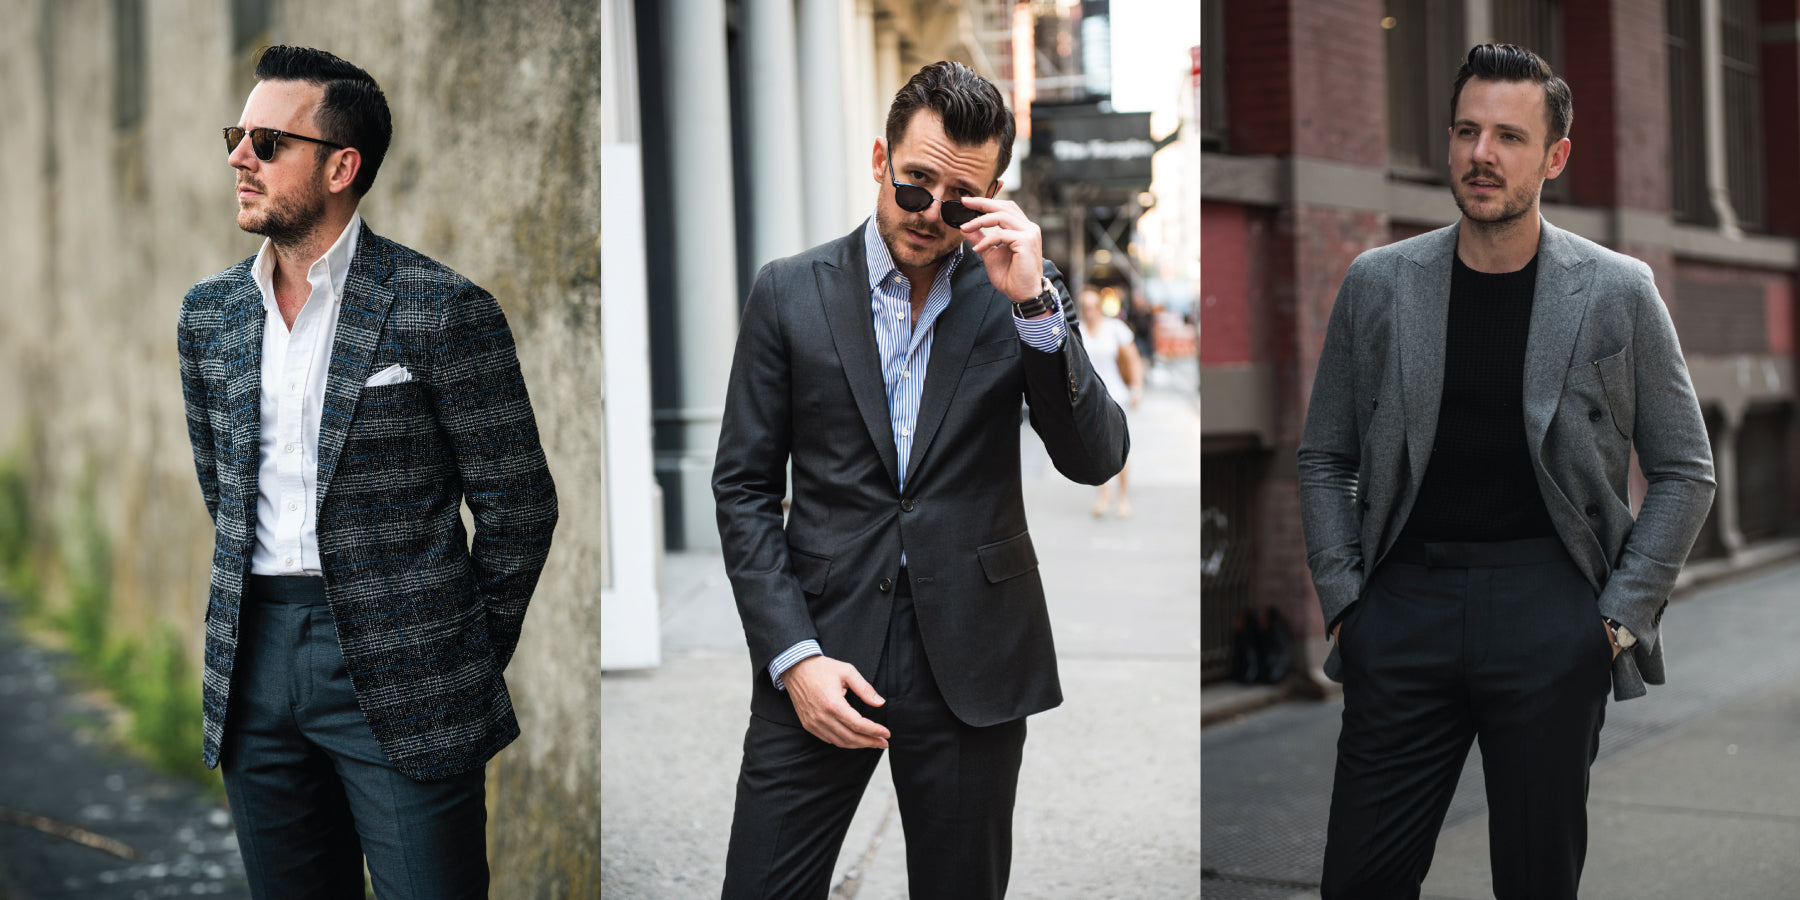 Articles of Style | 1 Piece/3 Ways: Essential Charcoal Suit